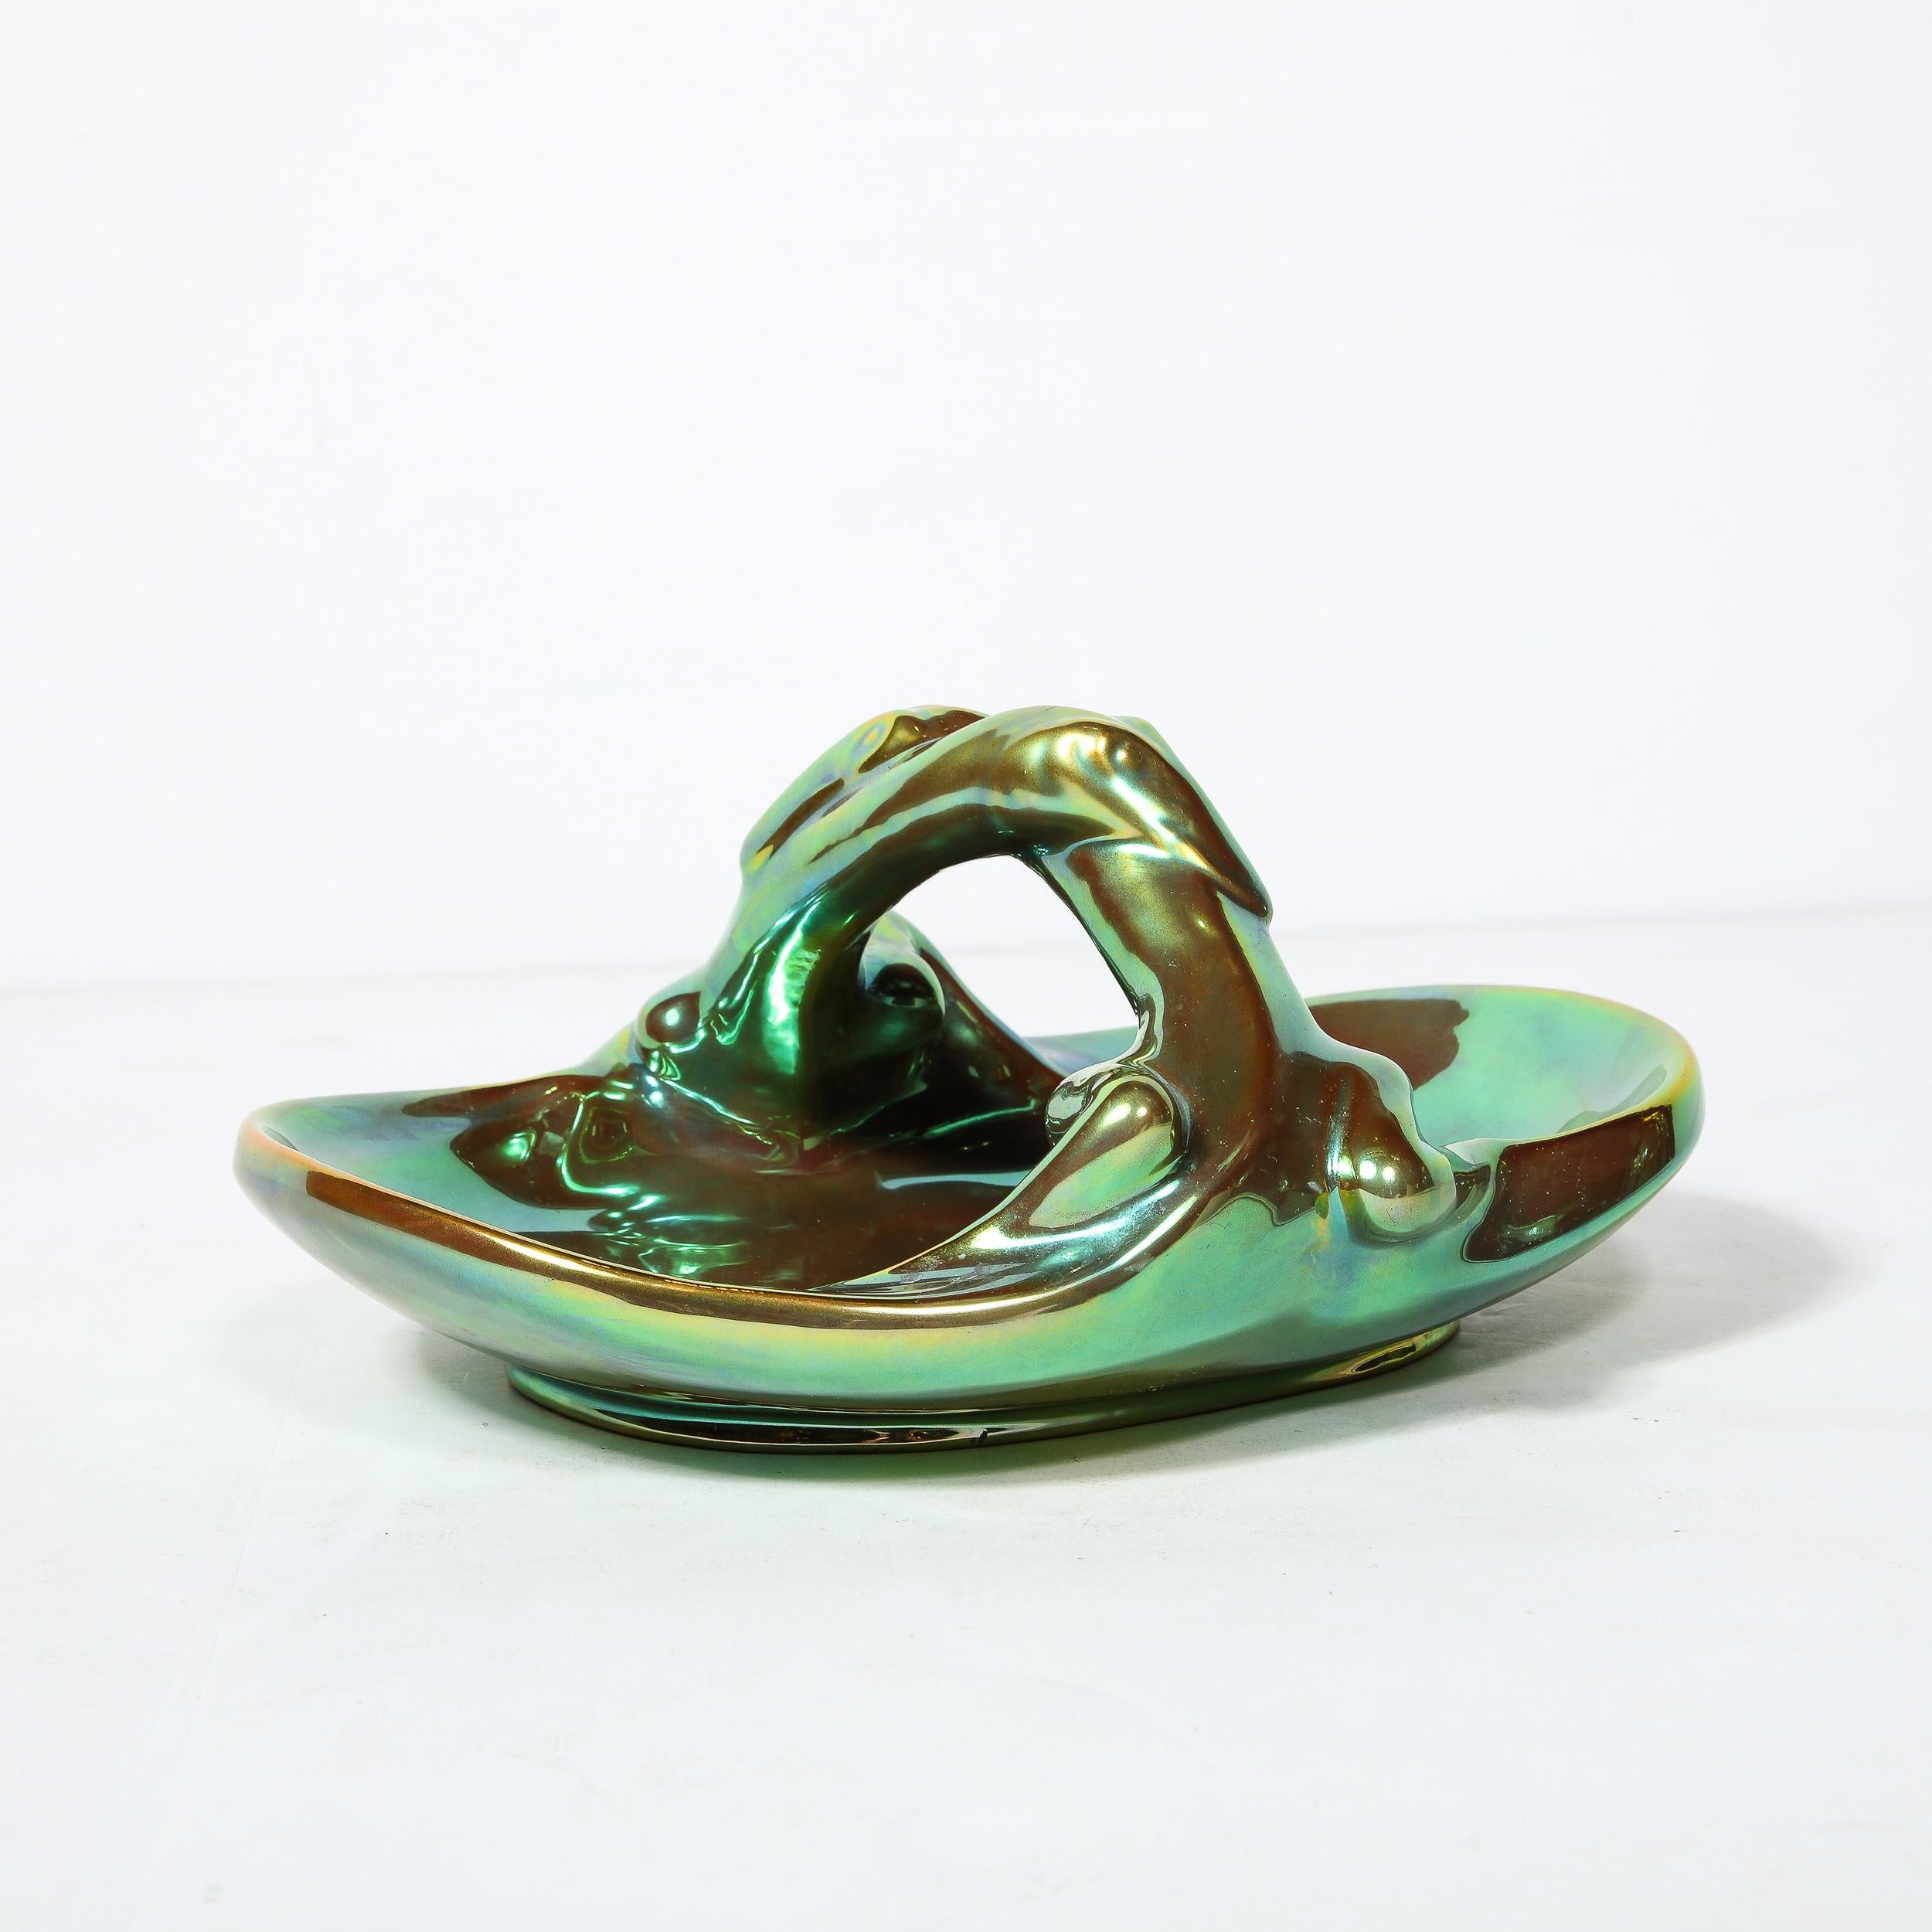 Art Deco Basket Form Ceramic Dish of Entwined Lizards by Zsolnay Eosin For Sale 6